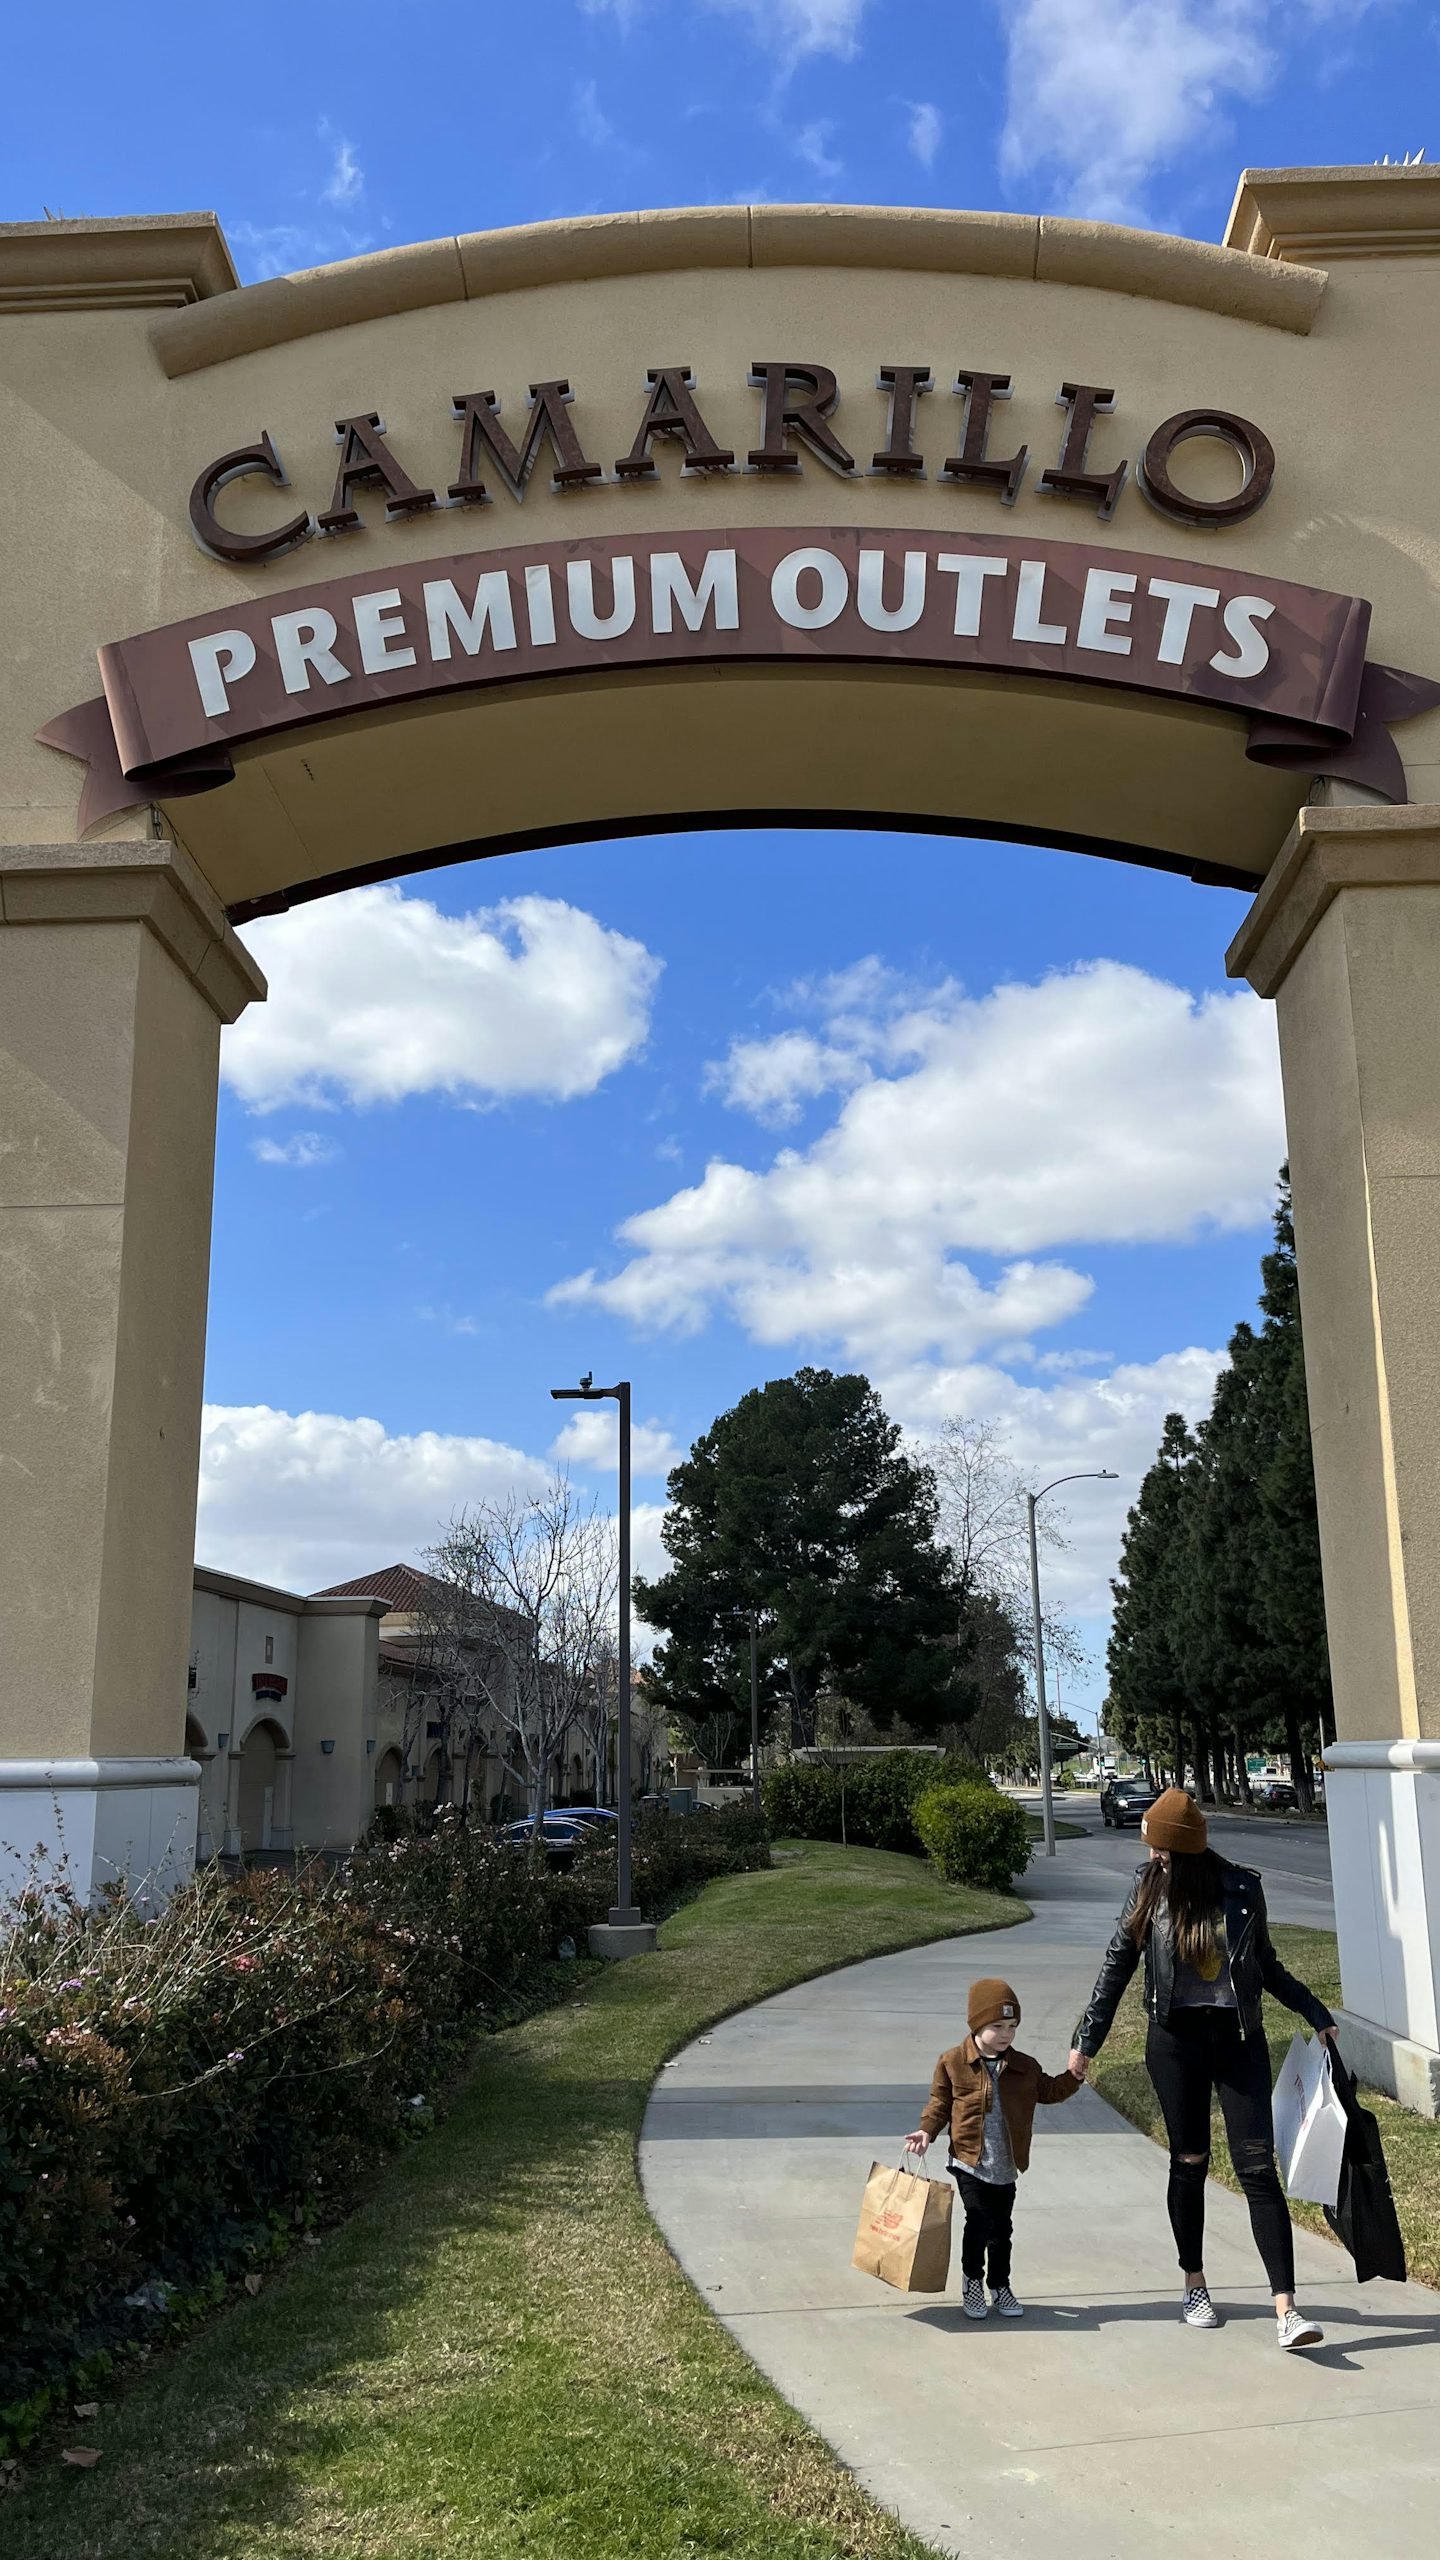 First Timer's Guide to the Camarillo Premium Outlets